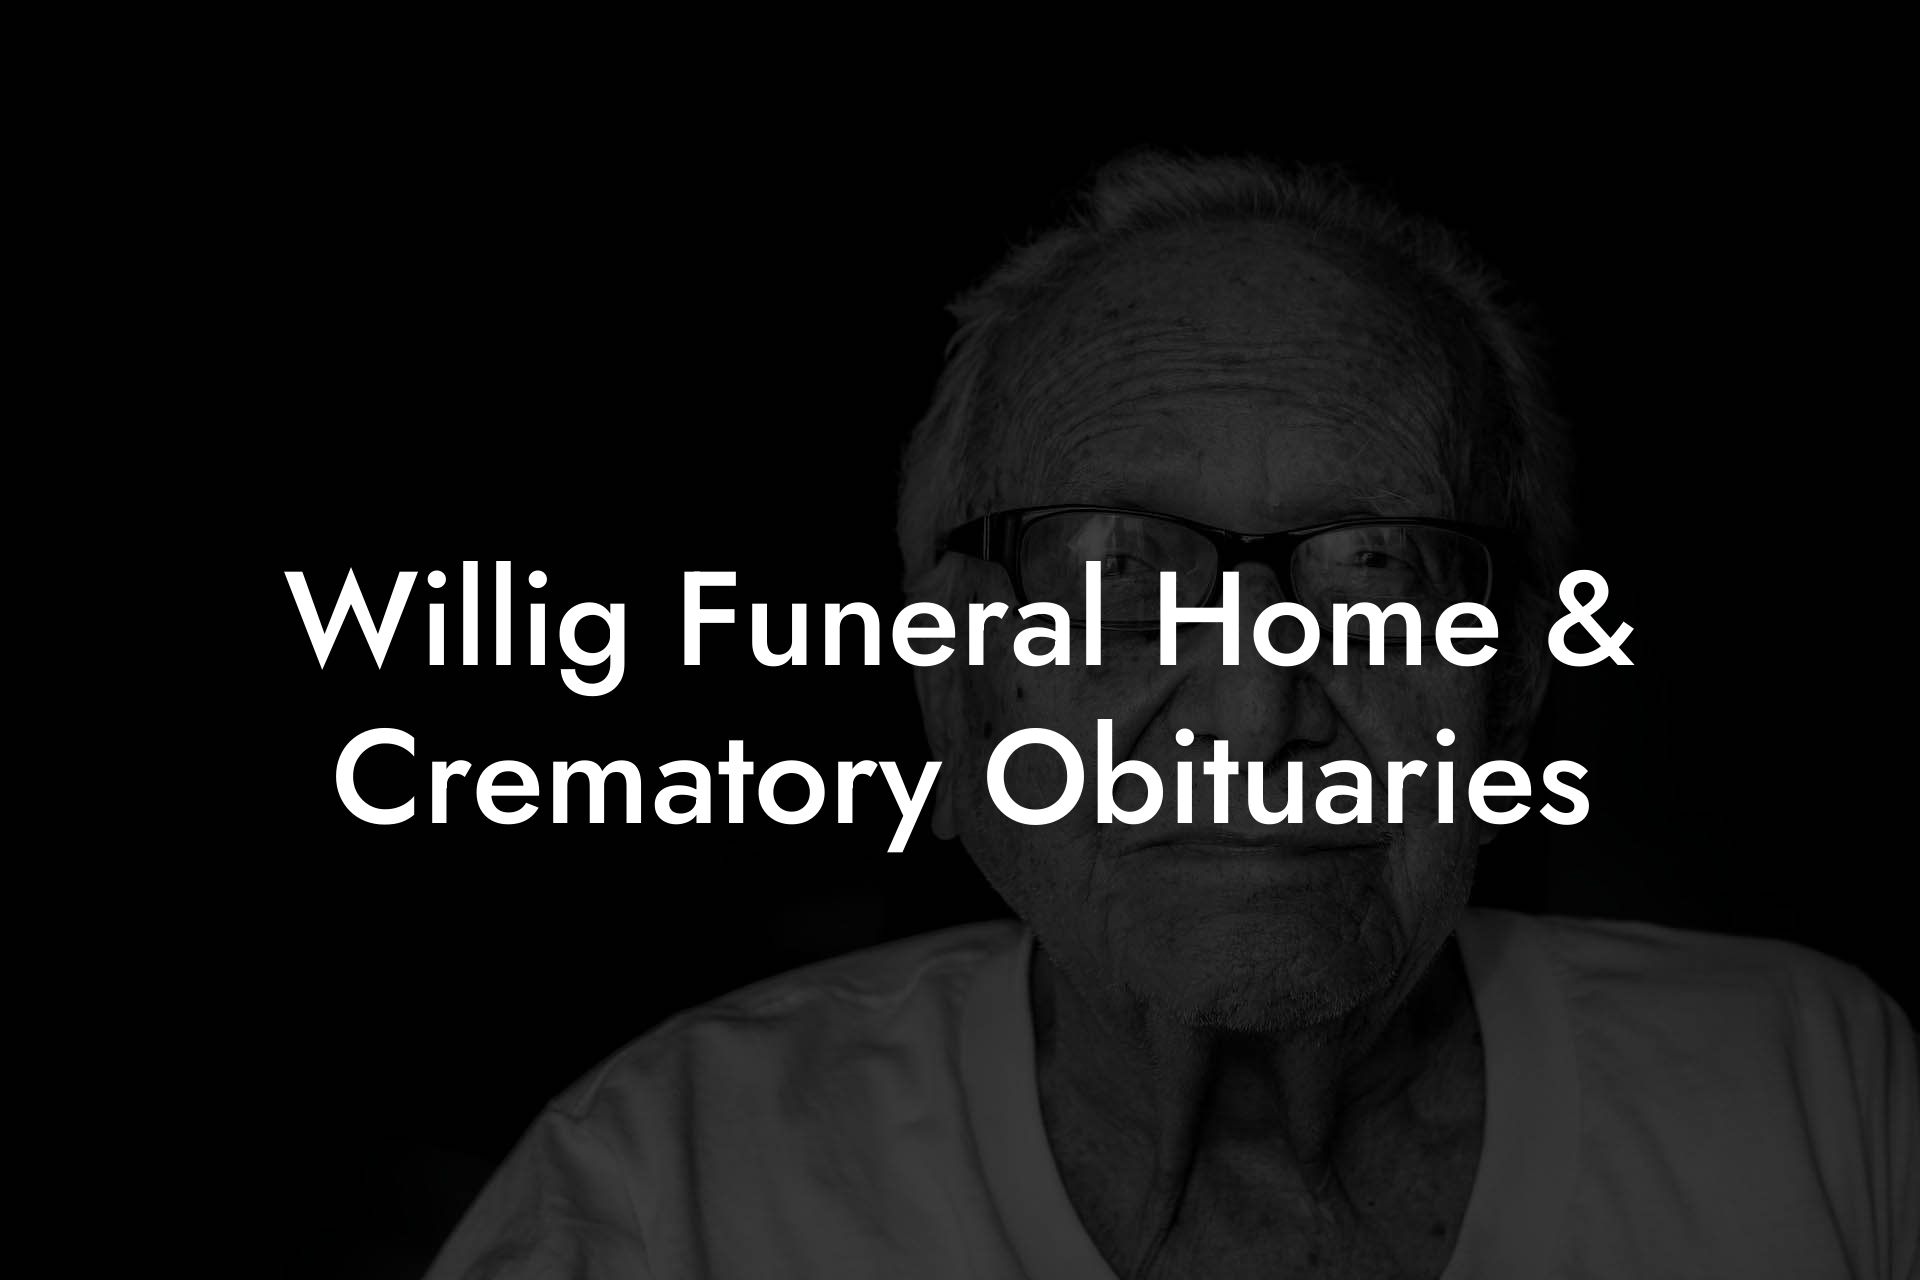 Willig Funeral Home & Crematory Obituaries